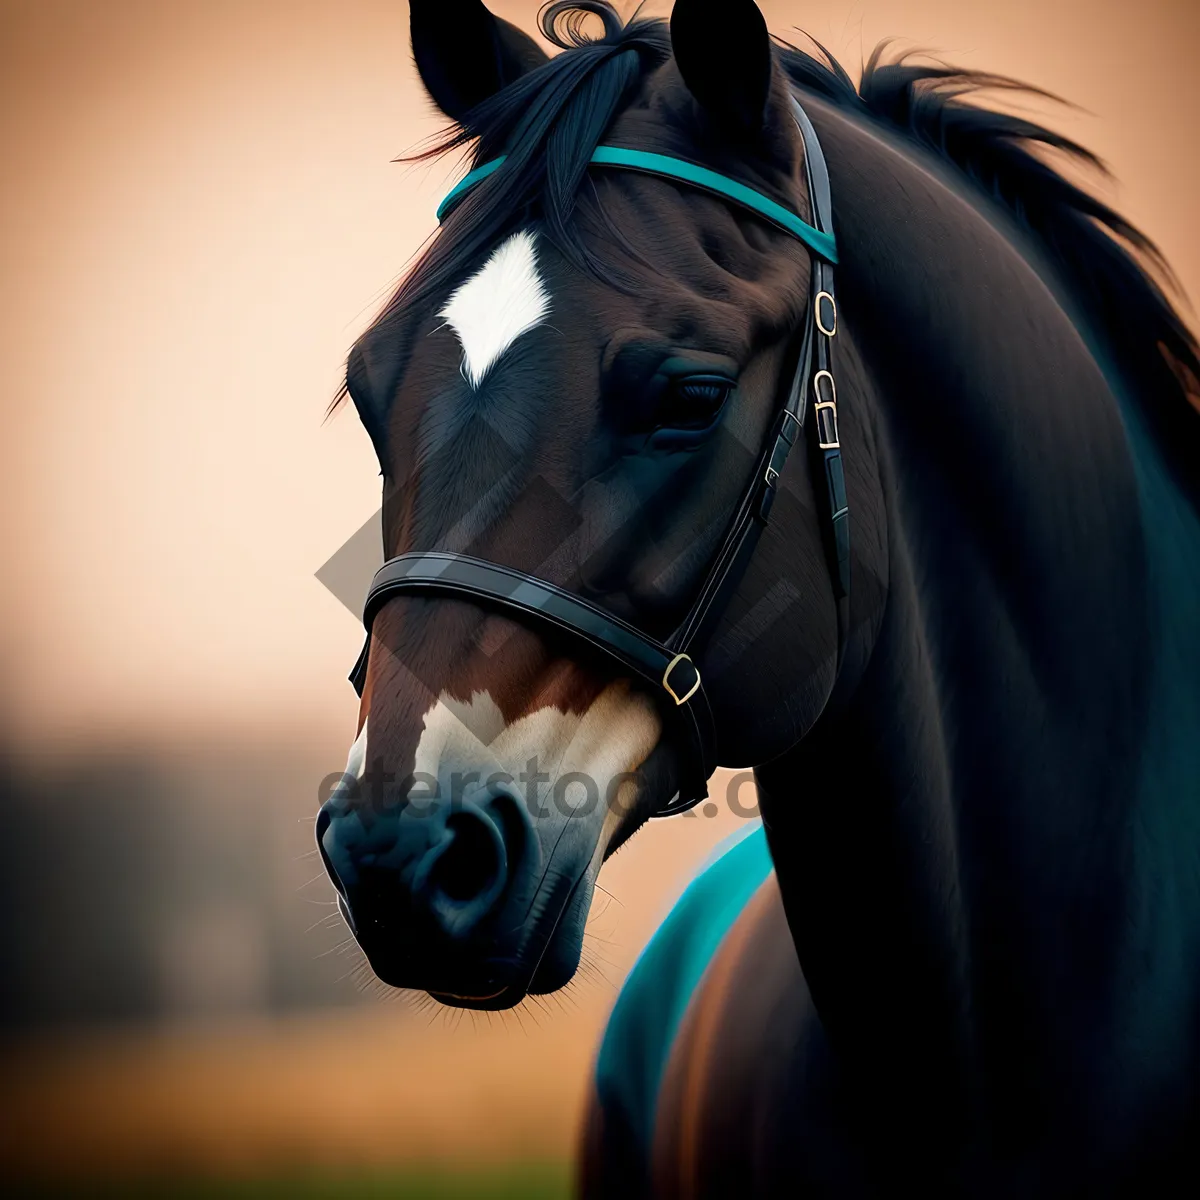 Picture of Equine Sport Ranch: Thoroughbred Horse Portrait